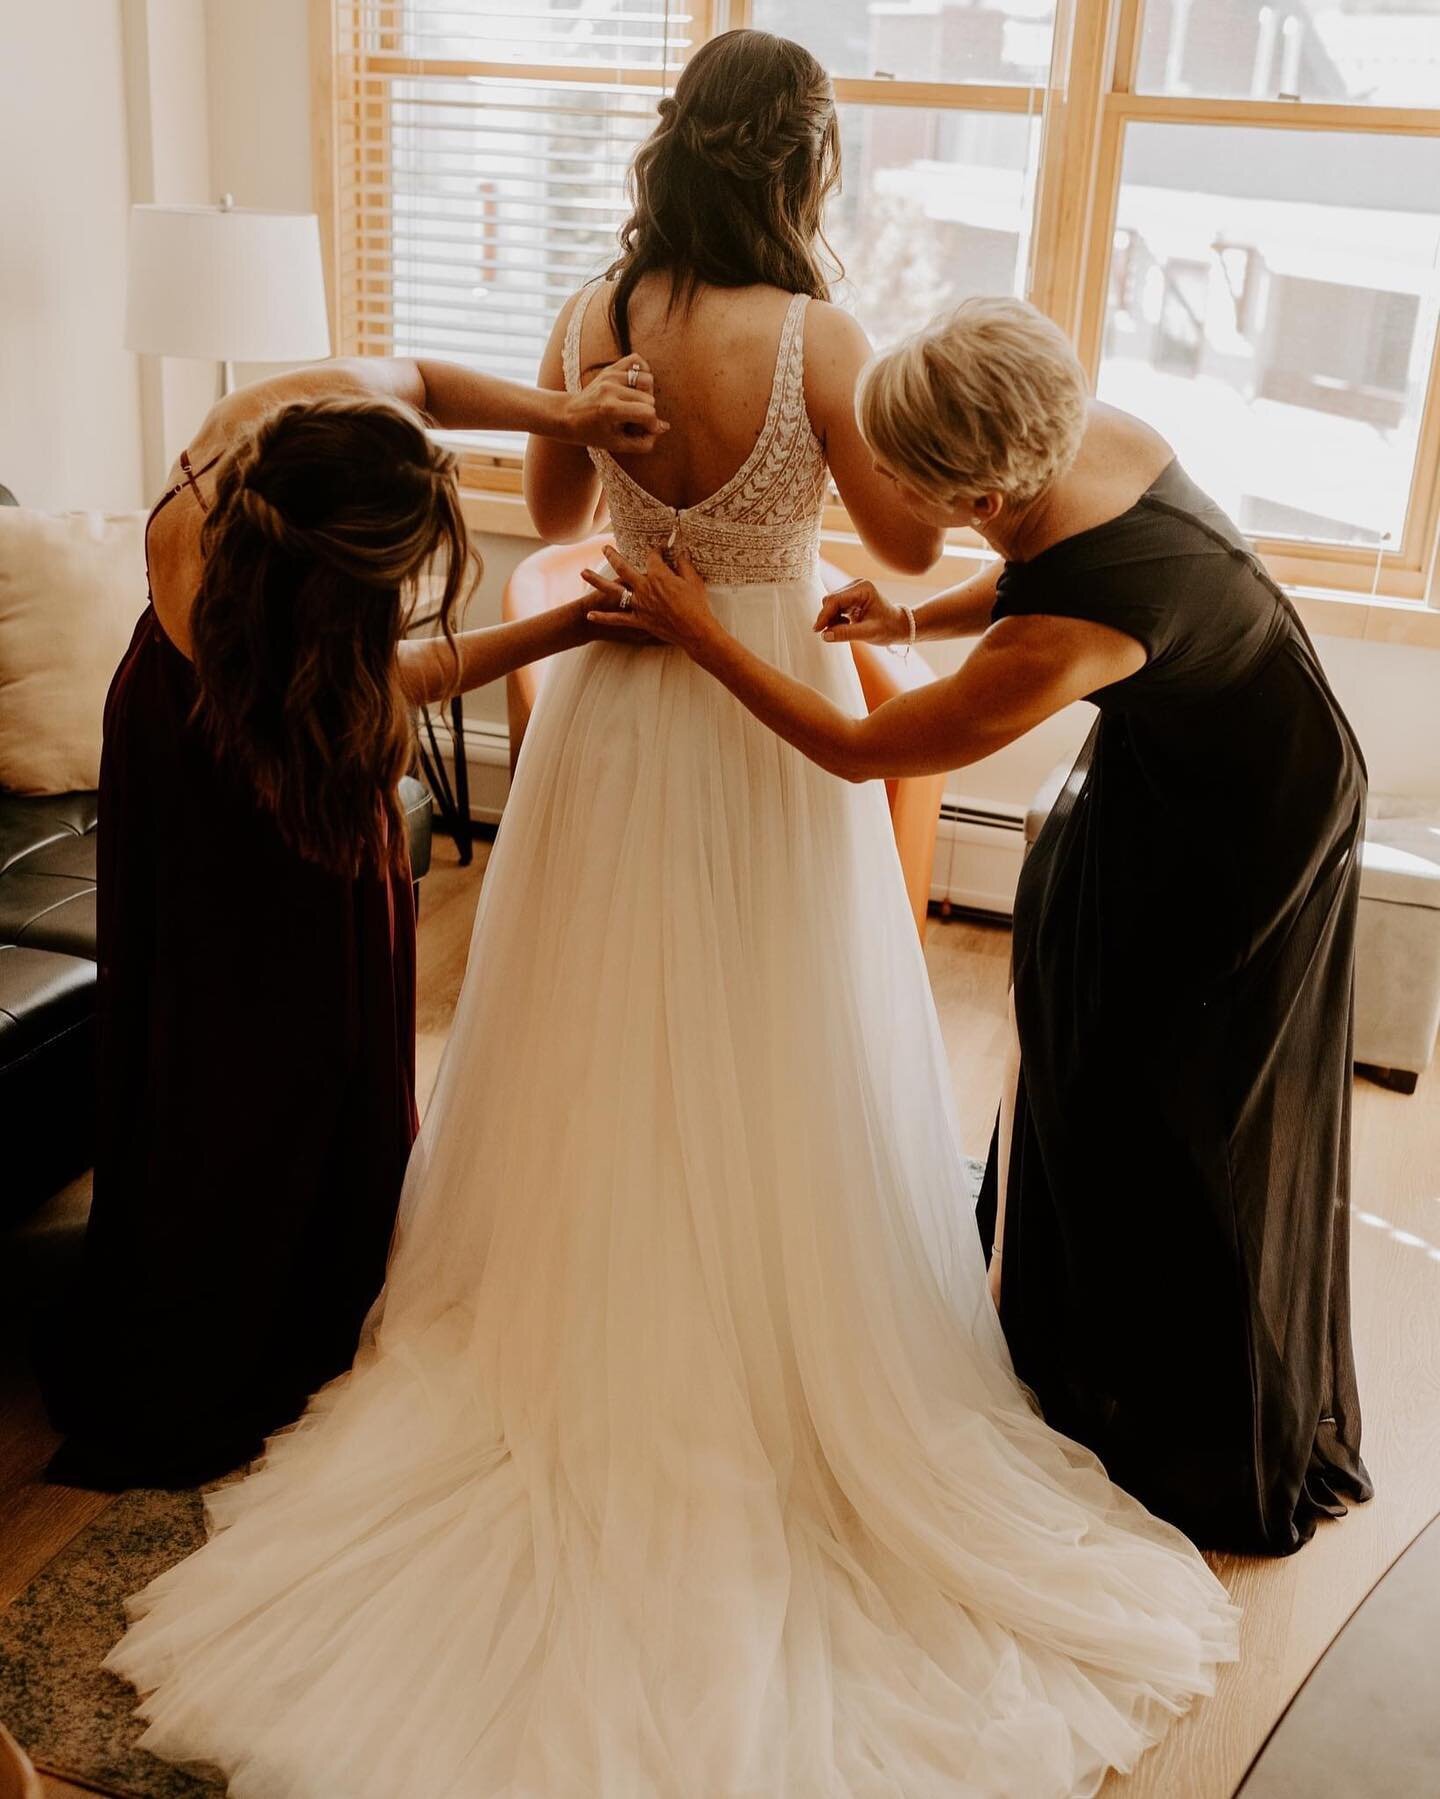 The final touches&hellip; 
Who&rsquo;ll be helping you get ready on your special day? 

#style_44120 #sinceritybridal 

#wedding #weddingday #weddingprep #weddingpreparation #gettingready #finaltouch #finaltouches #bride #bridetobe #bridal